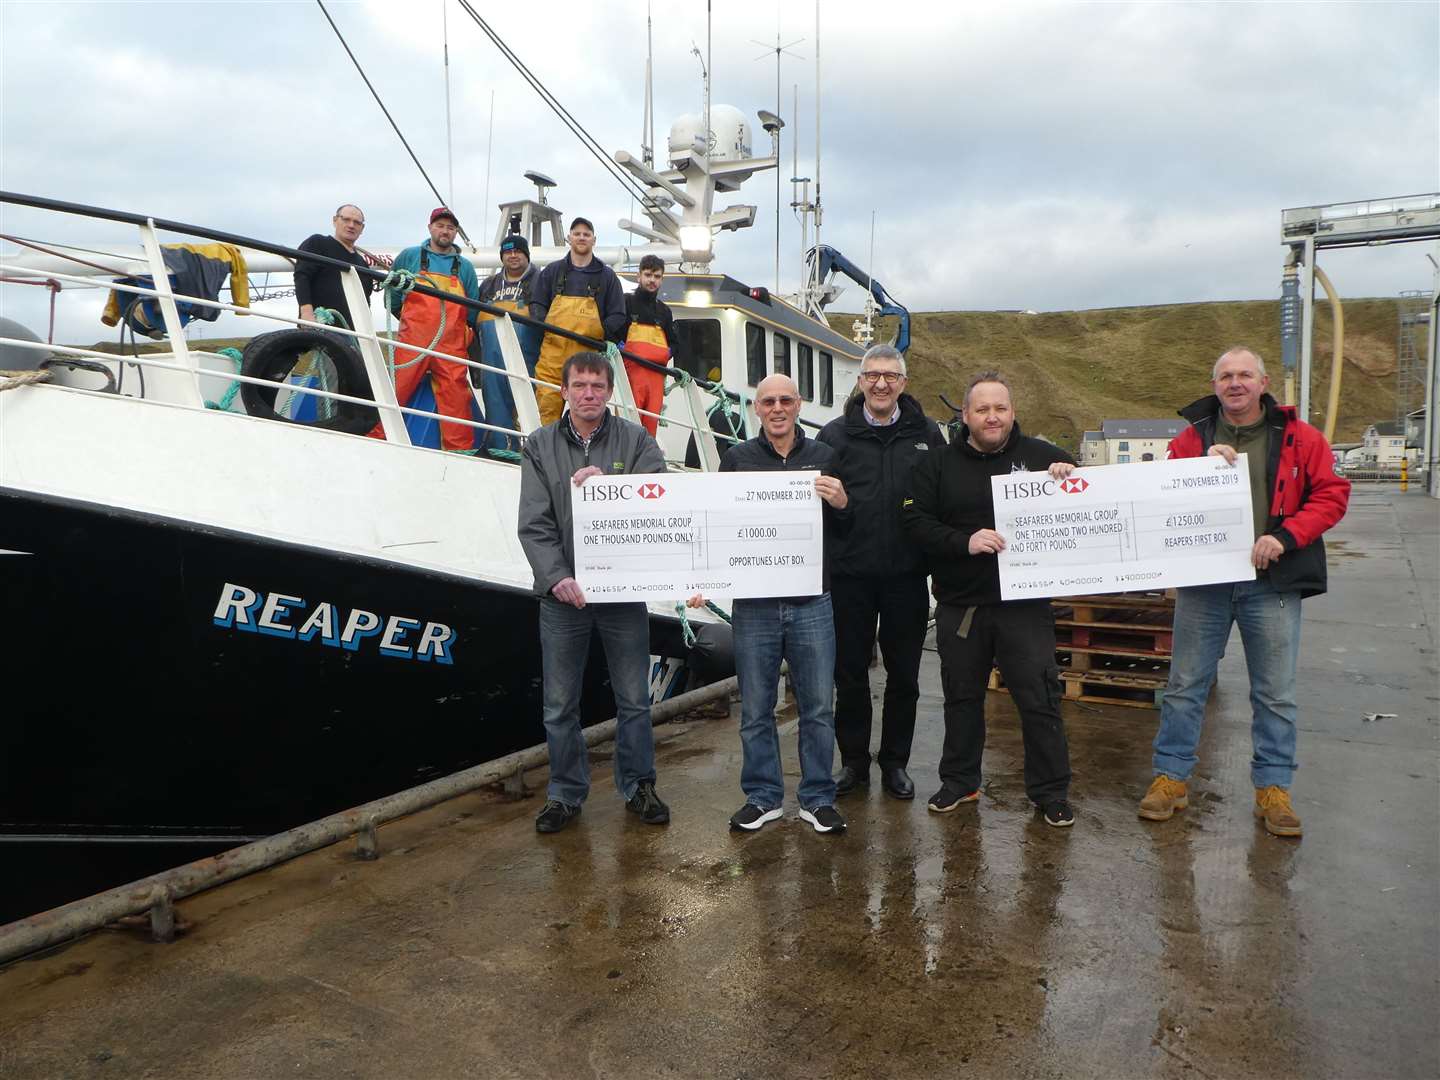 Cheques from local boats Reaper and Opportune are presented to the chairman of the Seafarers Memorial Group, Willie Watt. From left: Darren Norquoy, of Scrabster Seafoods, Graeme Bremner, Bremner Fishing Company, Willie Watt, Reaper skipper Donald Anderson and joint owner Peter Sinclair.